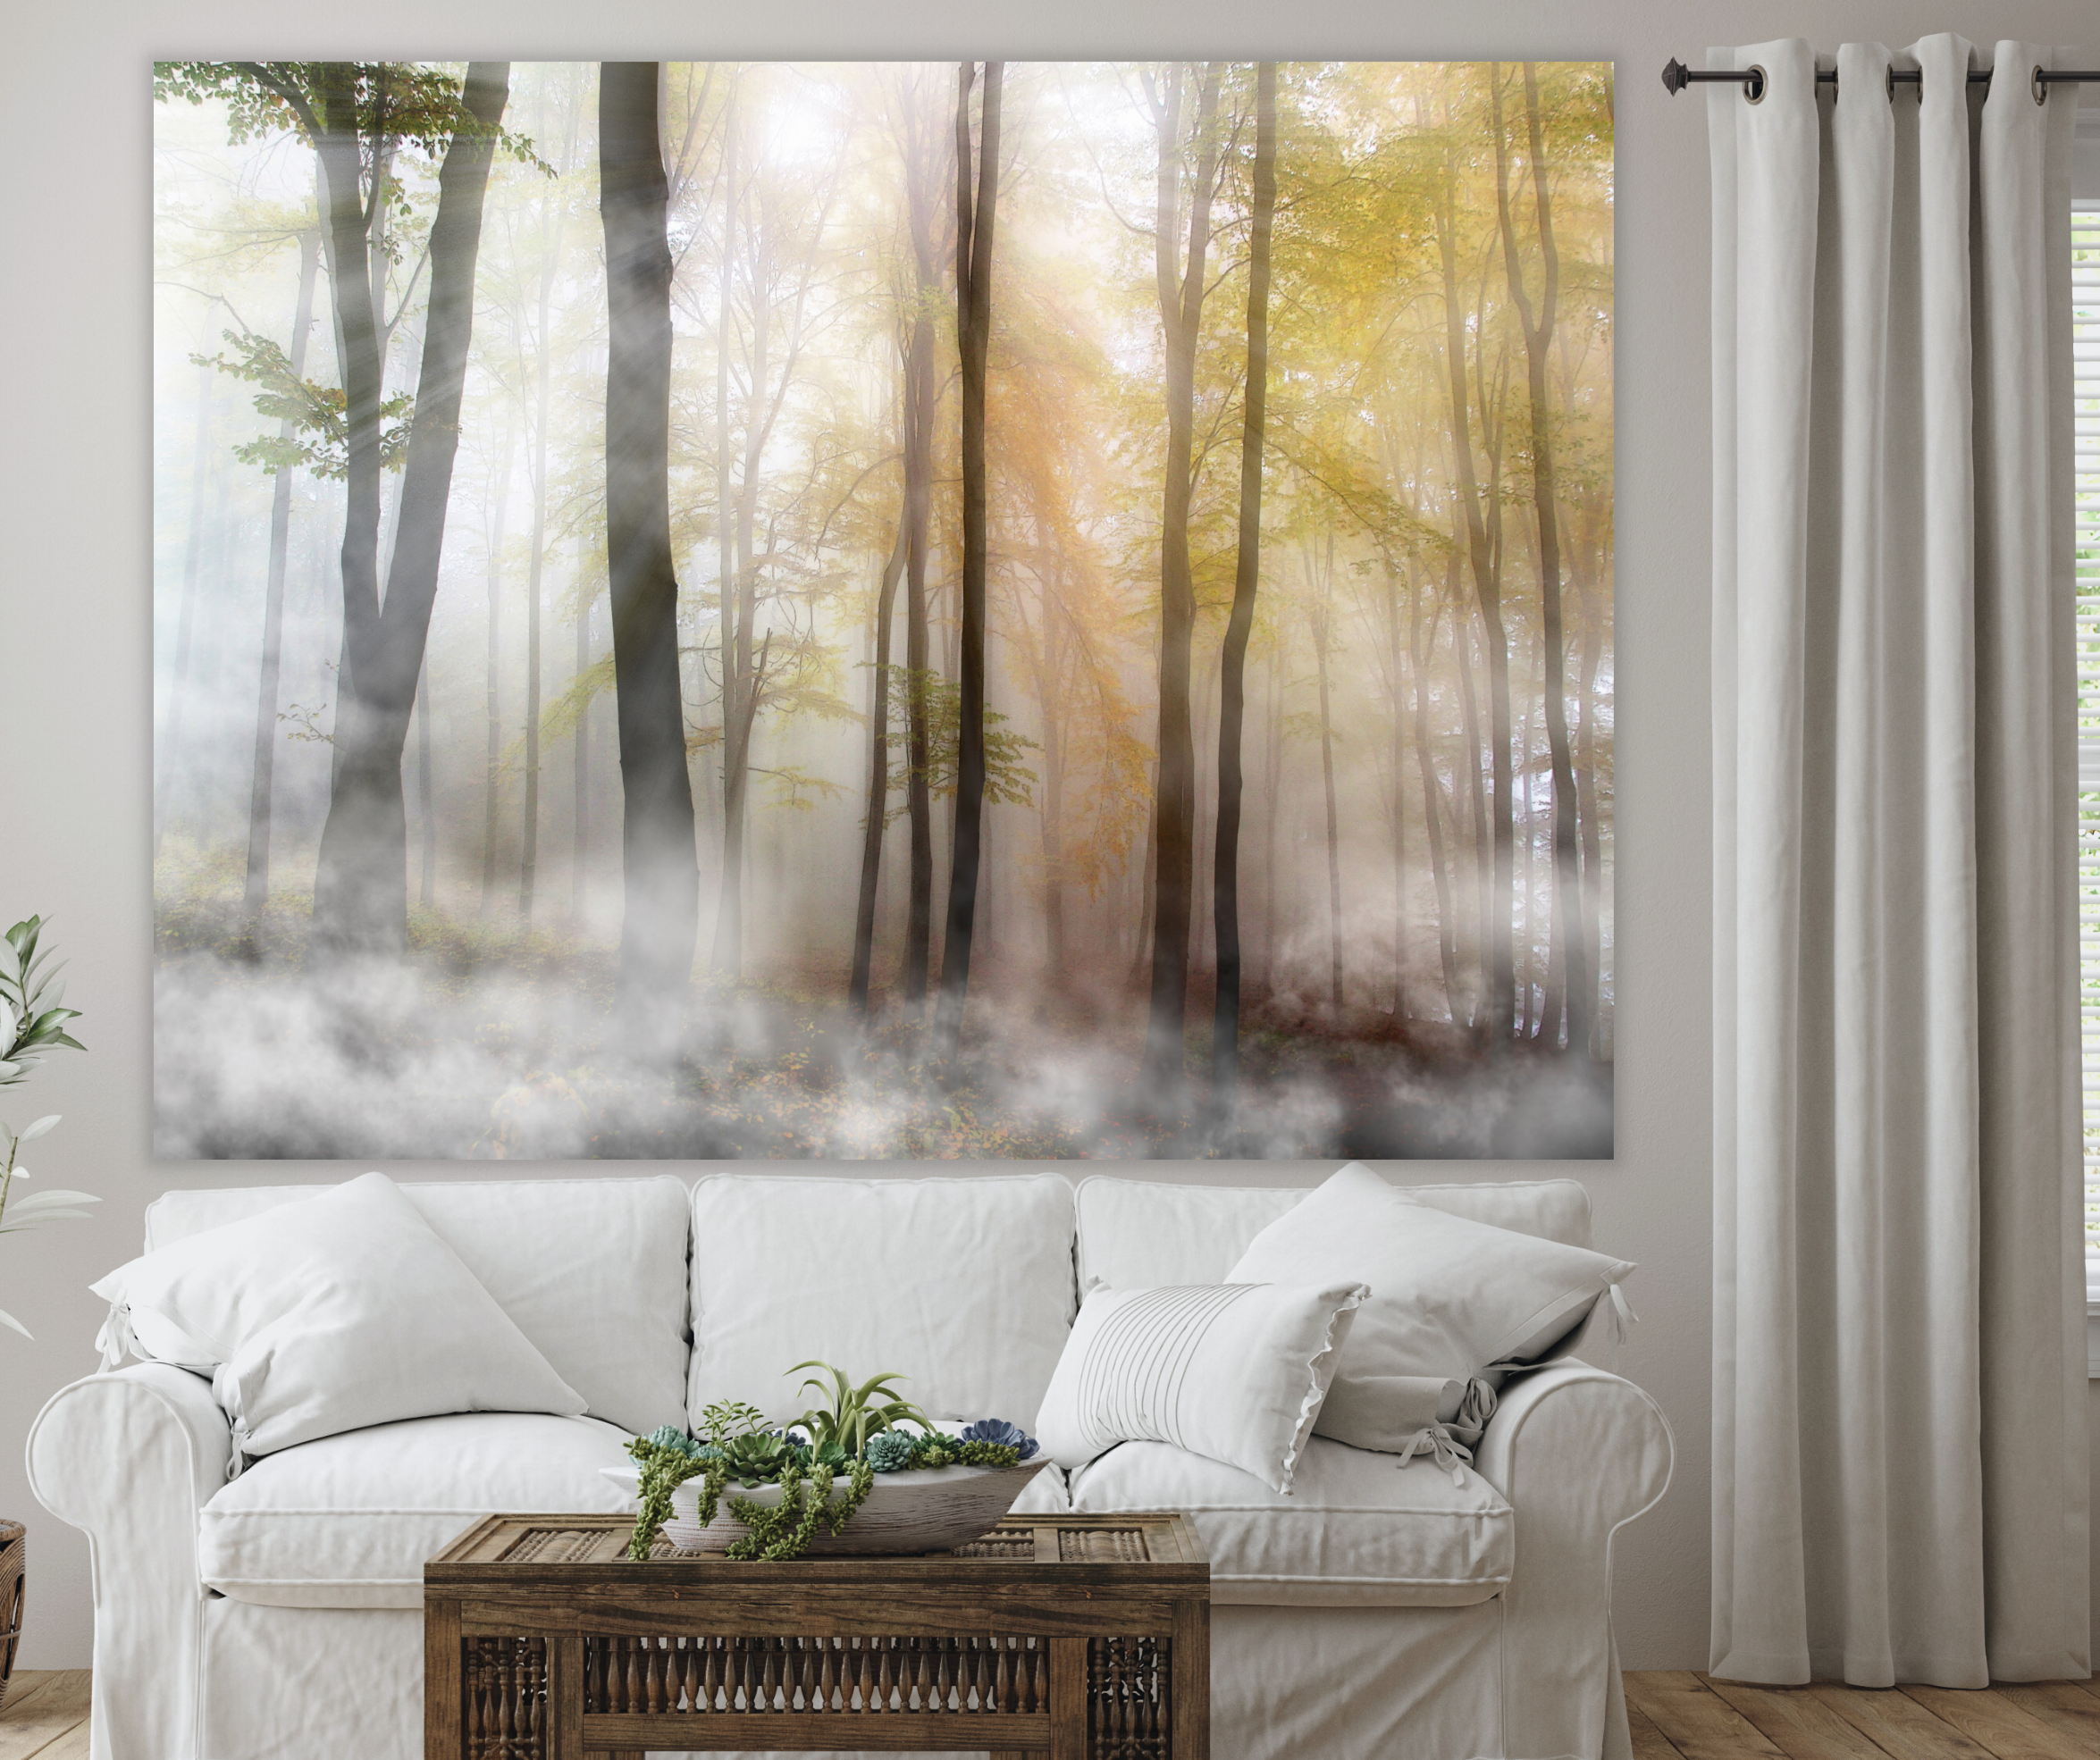 KaiSha LED Tapestry Bundle; LARGE SIZE; Tapestry+ 2 Rods; Aesthetic Tapestries Wall Accent Backdrops Modern